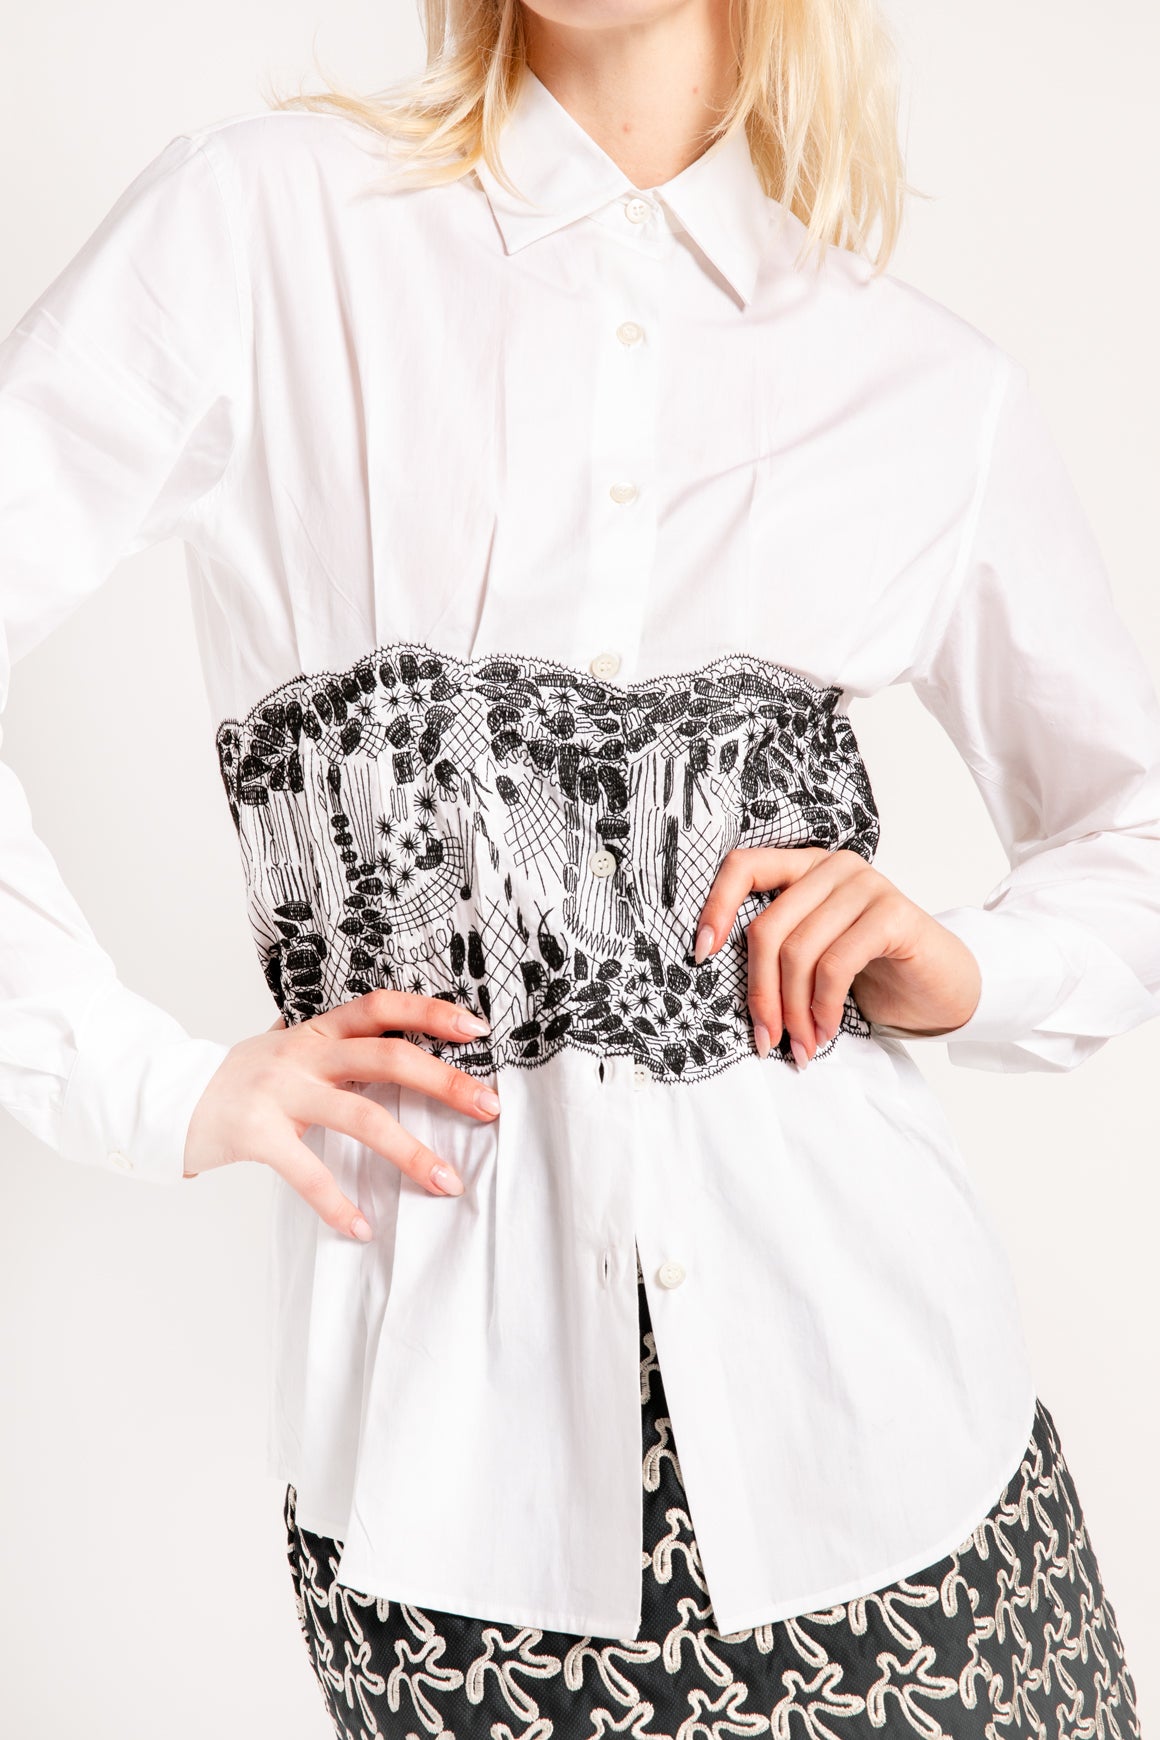 DRIES VAN NOTEN White Embroidered Blouse